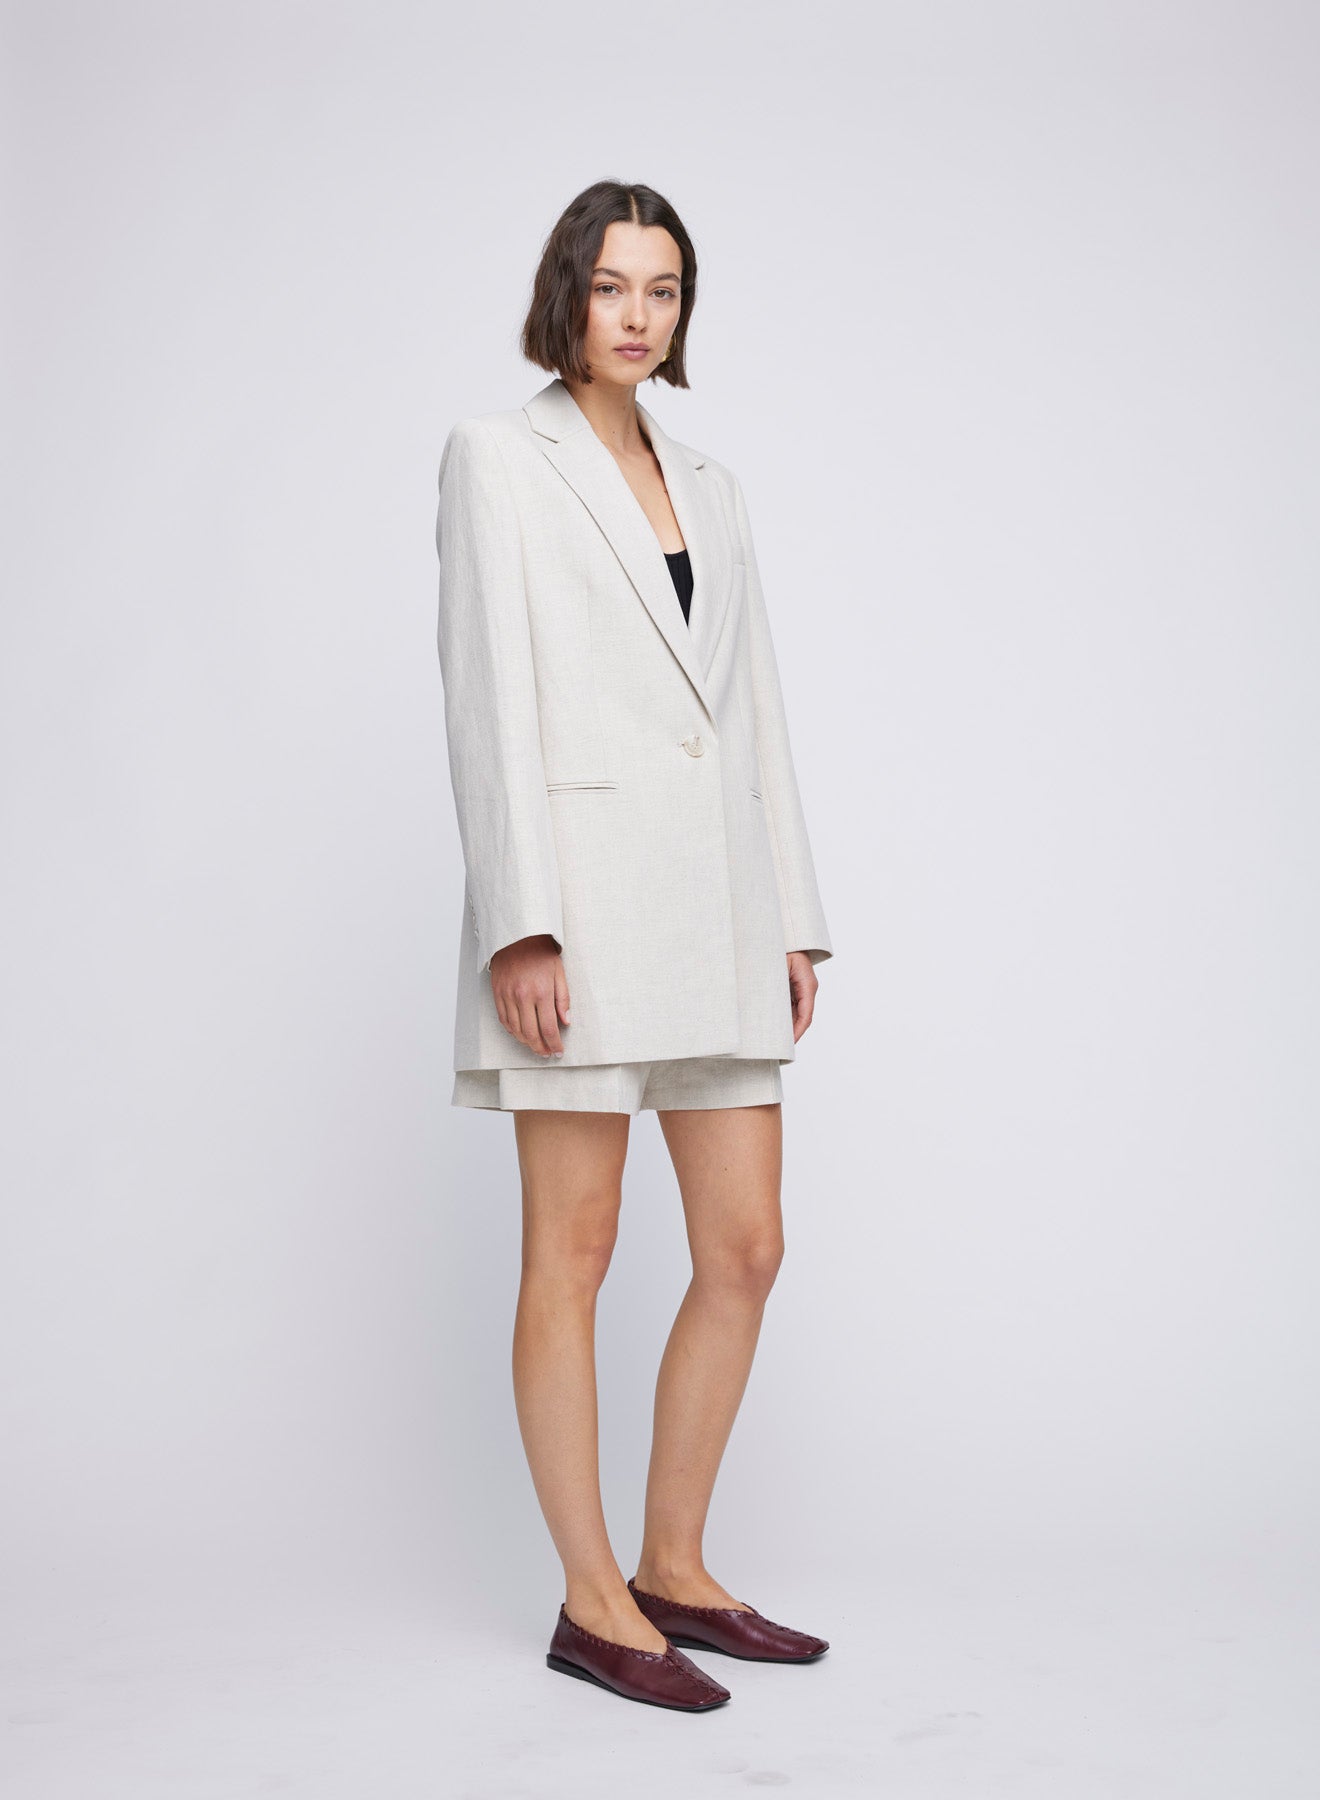 Oversized Blazer featuring a sleek notch collar. This classic piece combines comfort with fashion, perfect for any occasion. Elevate your look effortlessly with this versatile and on-trend oversized blazer. Linen blazer, linen oversized blazer, oversized blazer, relaxed tailored blazer, relaxed workwear, everyday workwear, everyday blazer.